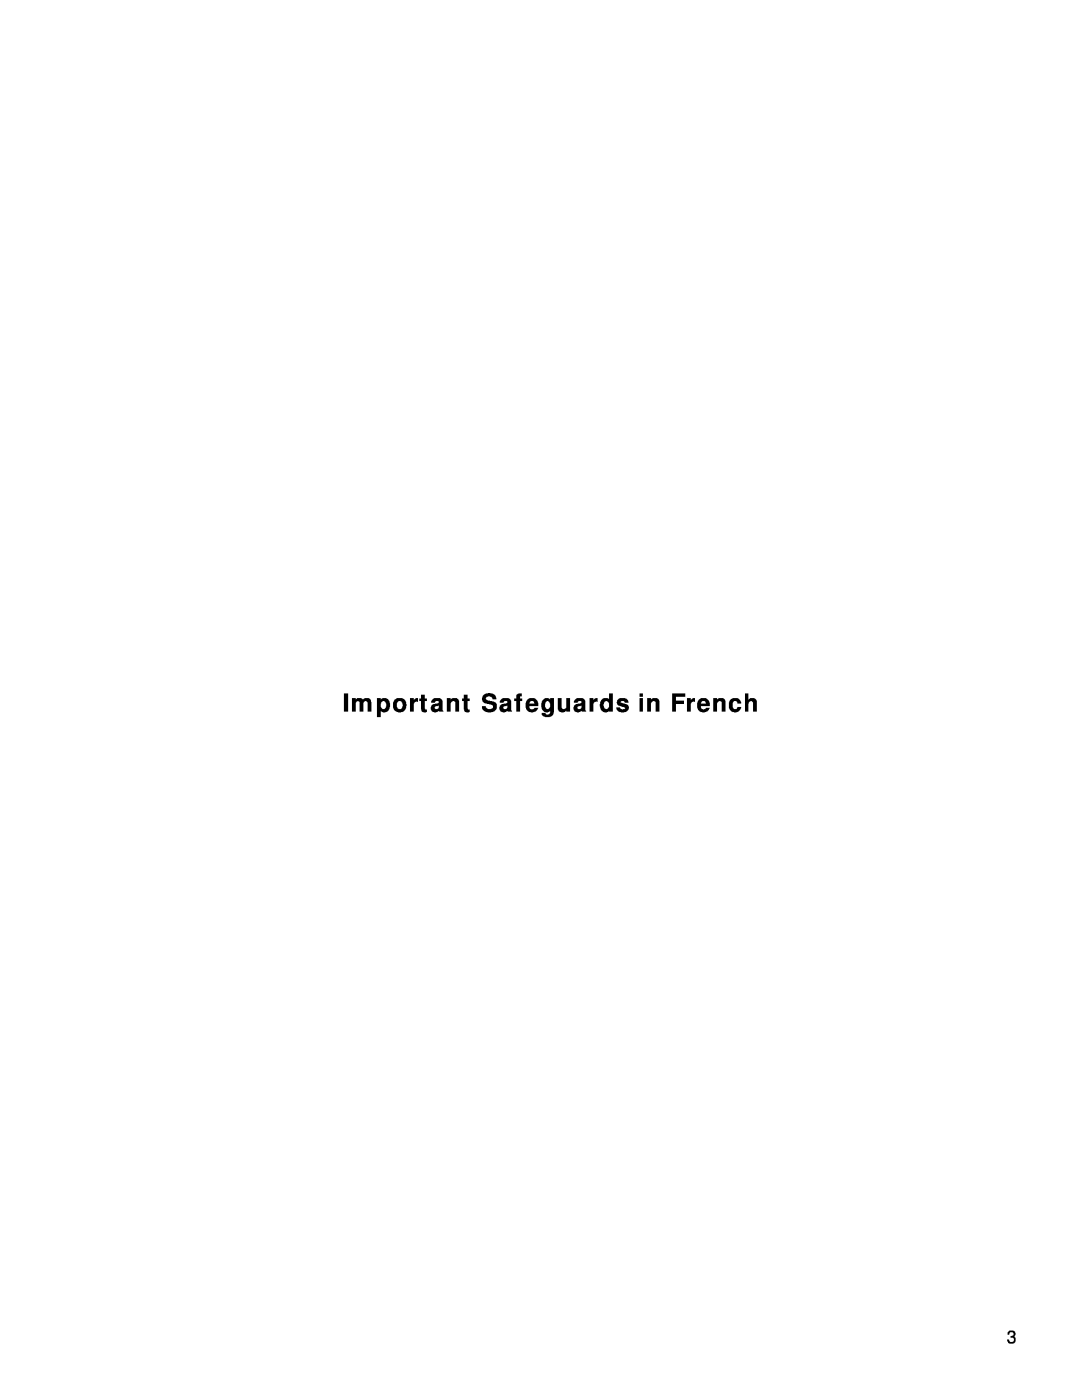 GE 71937, 106766 warranty Important Safeguards in French 